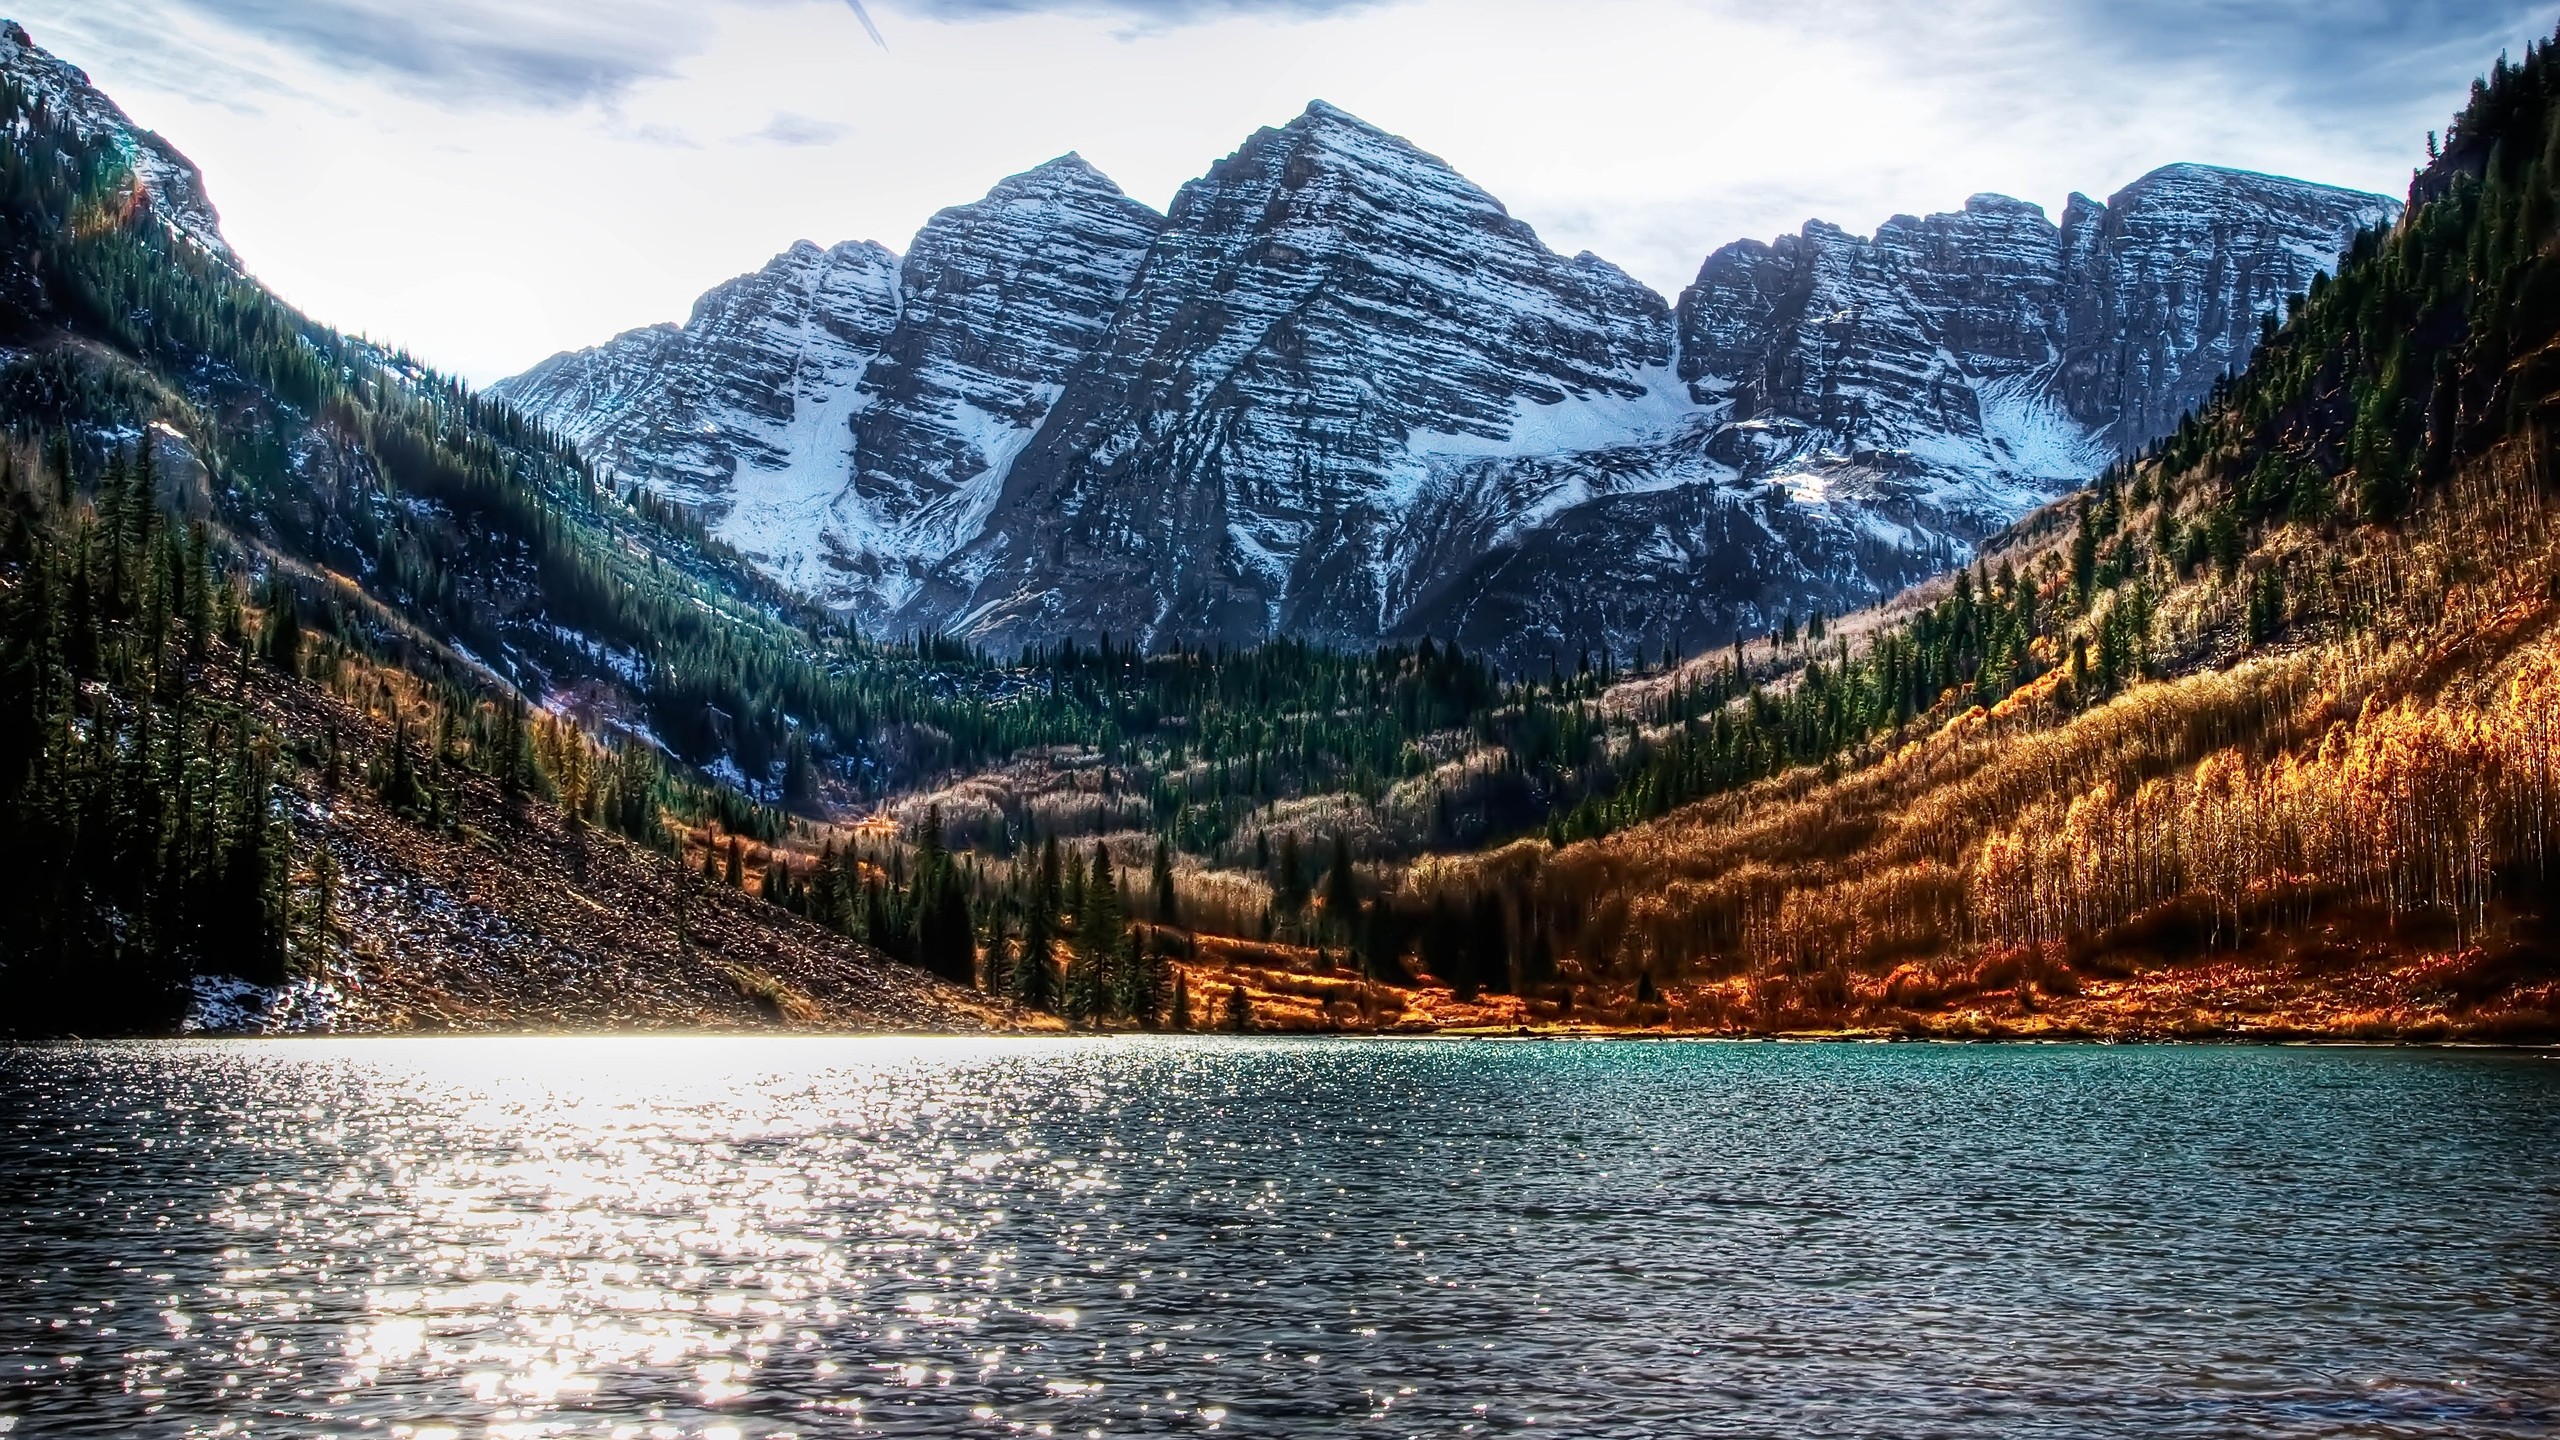 water mountains landscapes nature snow trees forests Colorado lakes